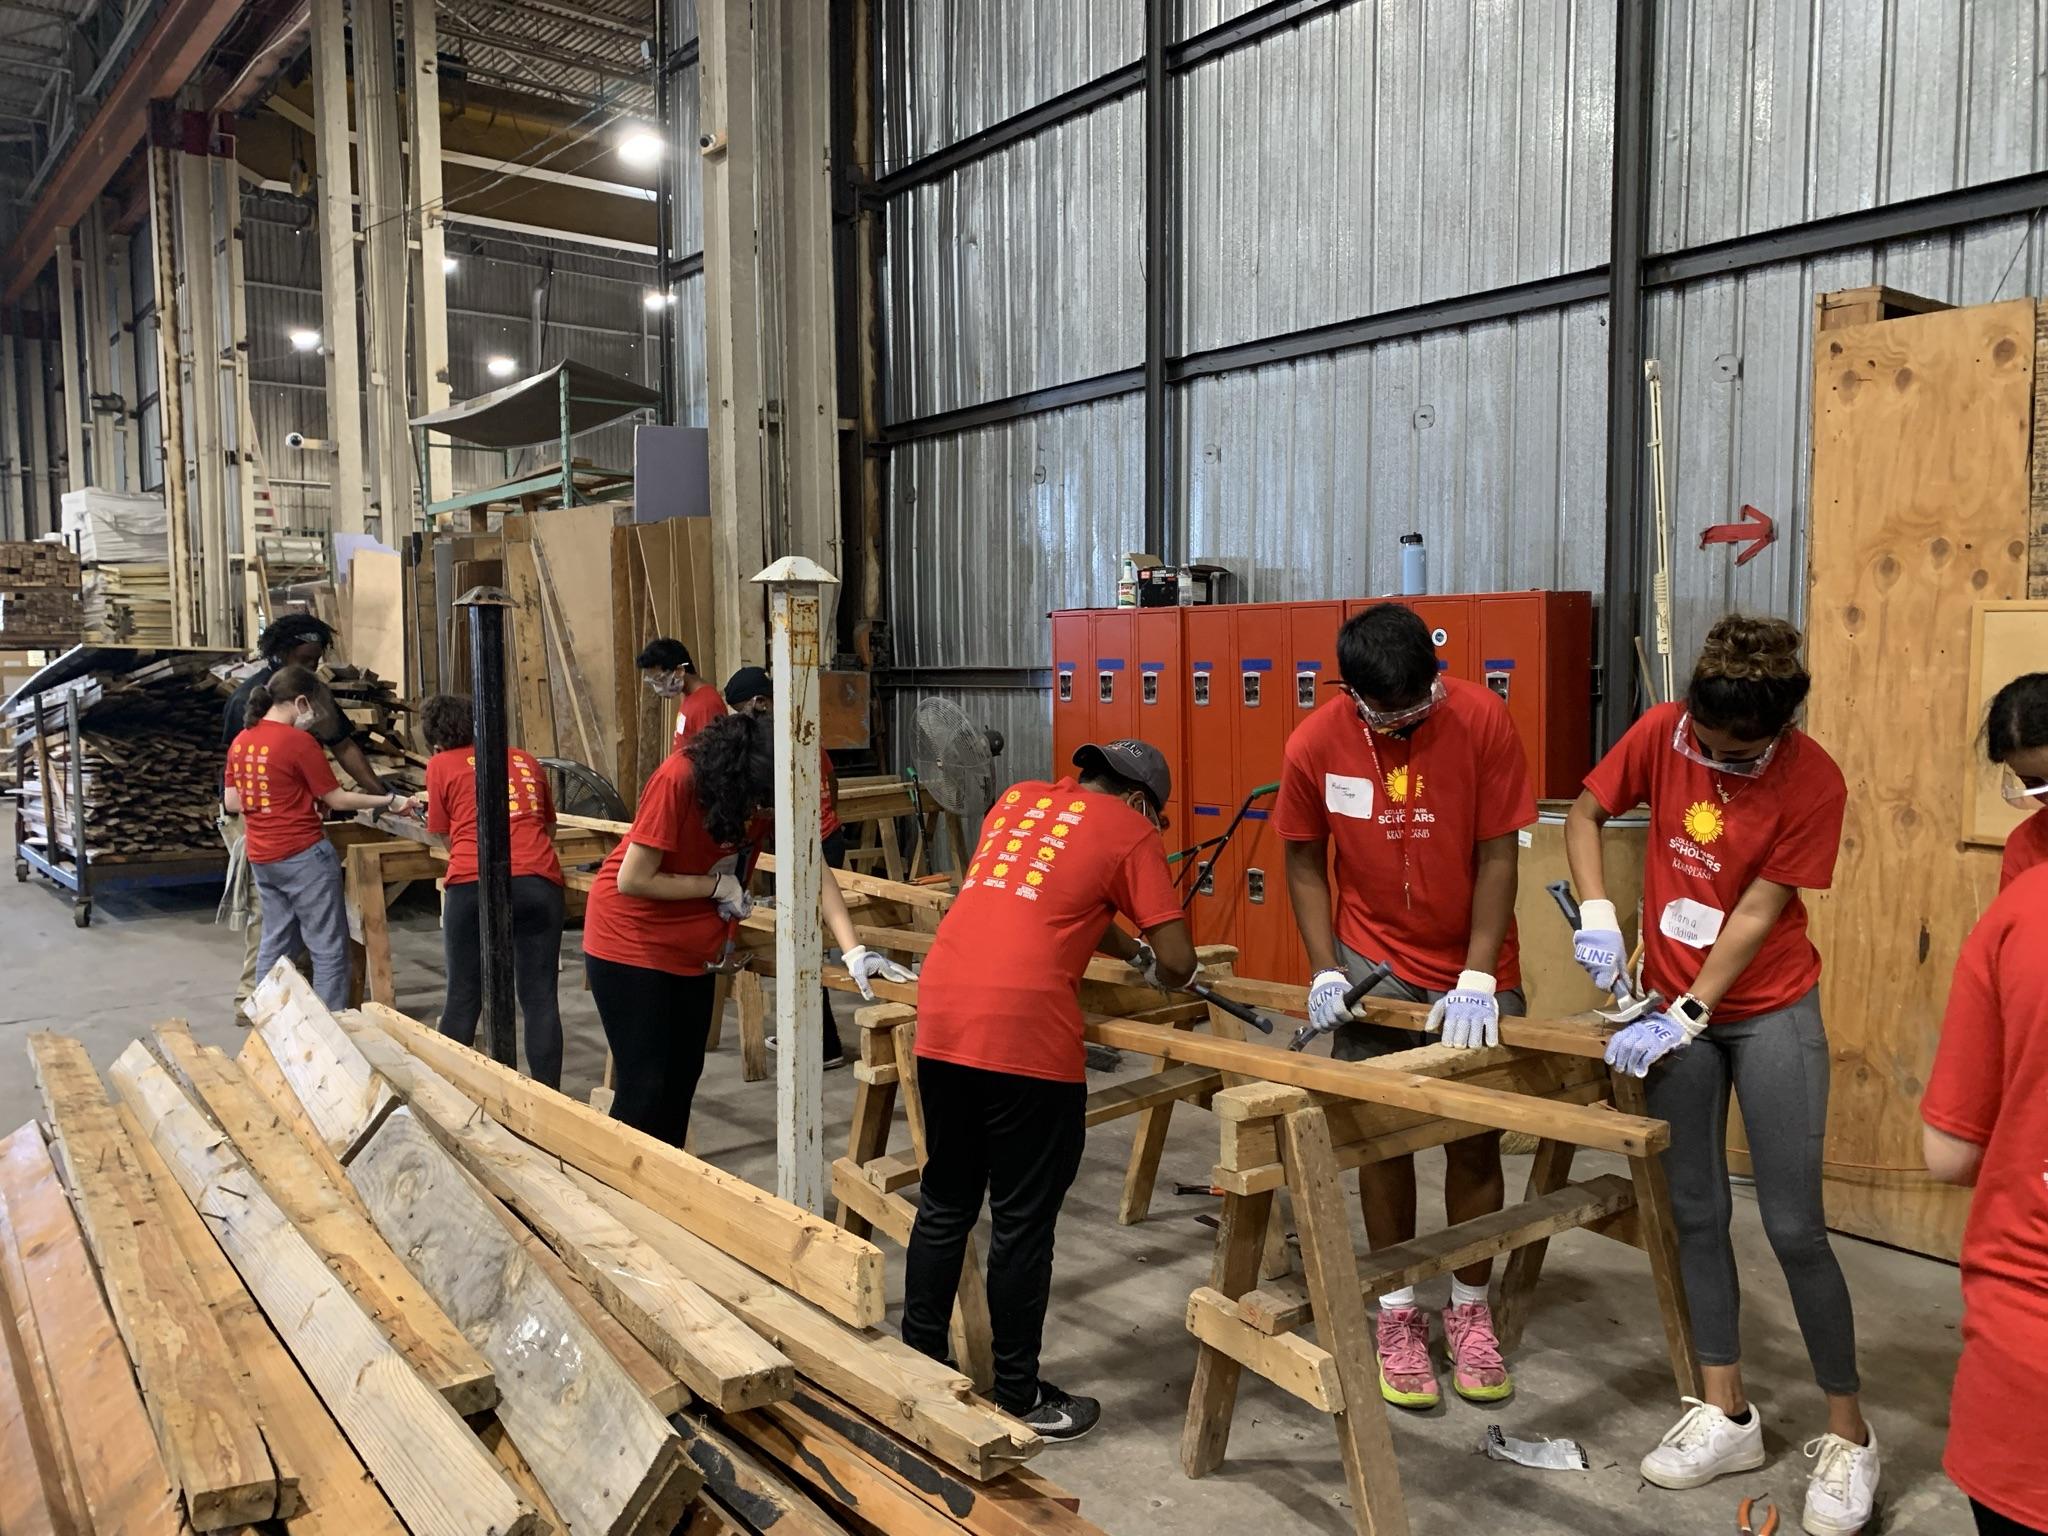 Global health scholars in red shirts stand a long a work bench, removing nails from planks of wood with hammers.